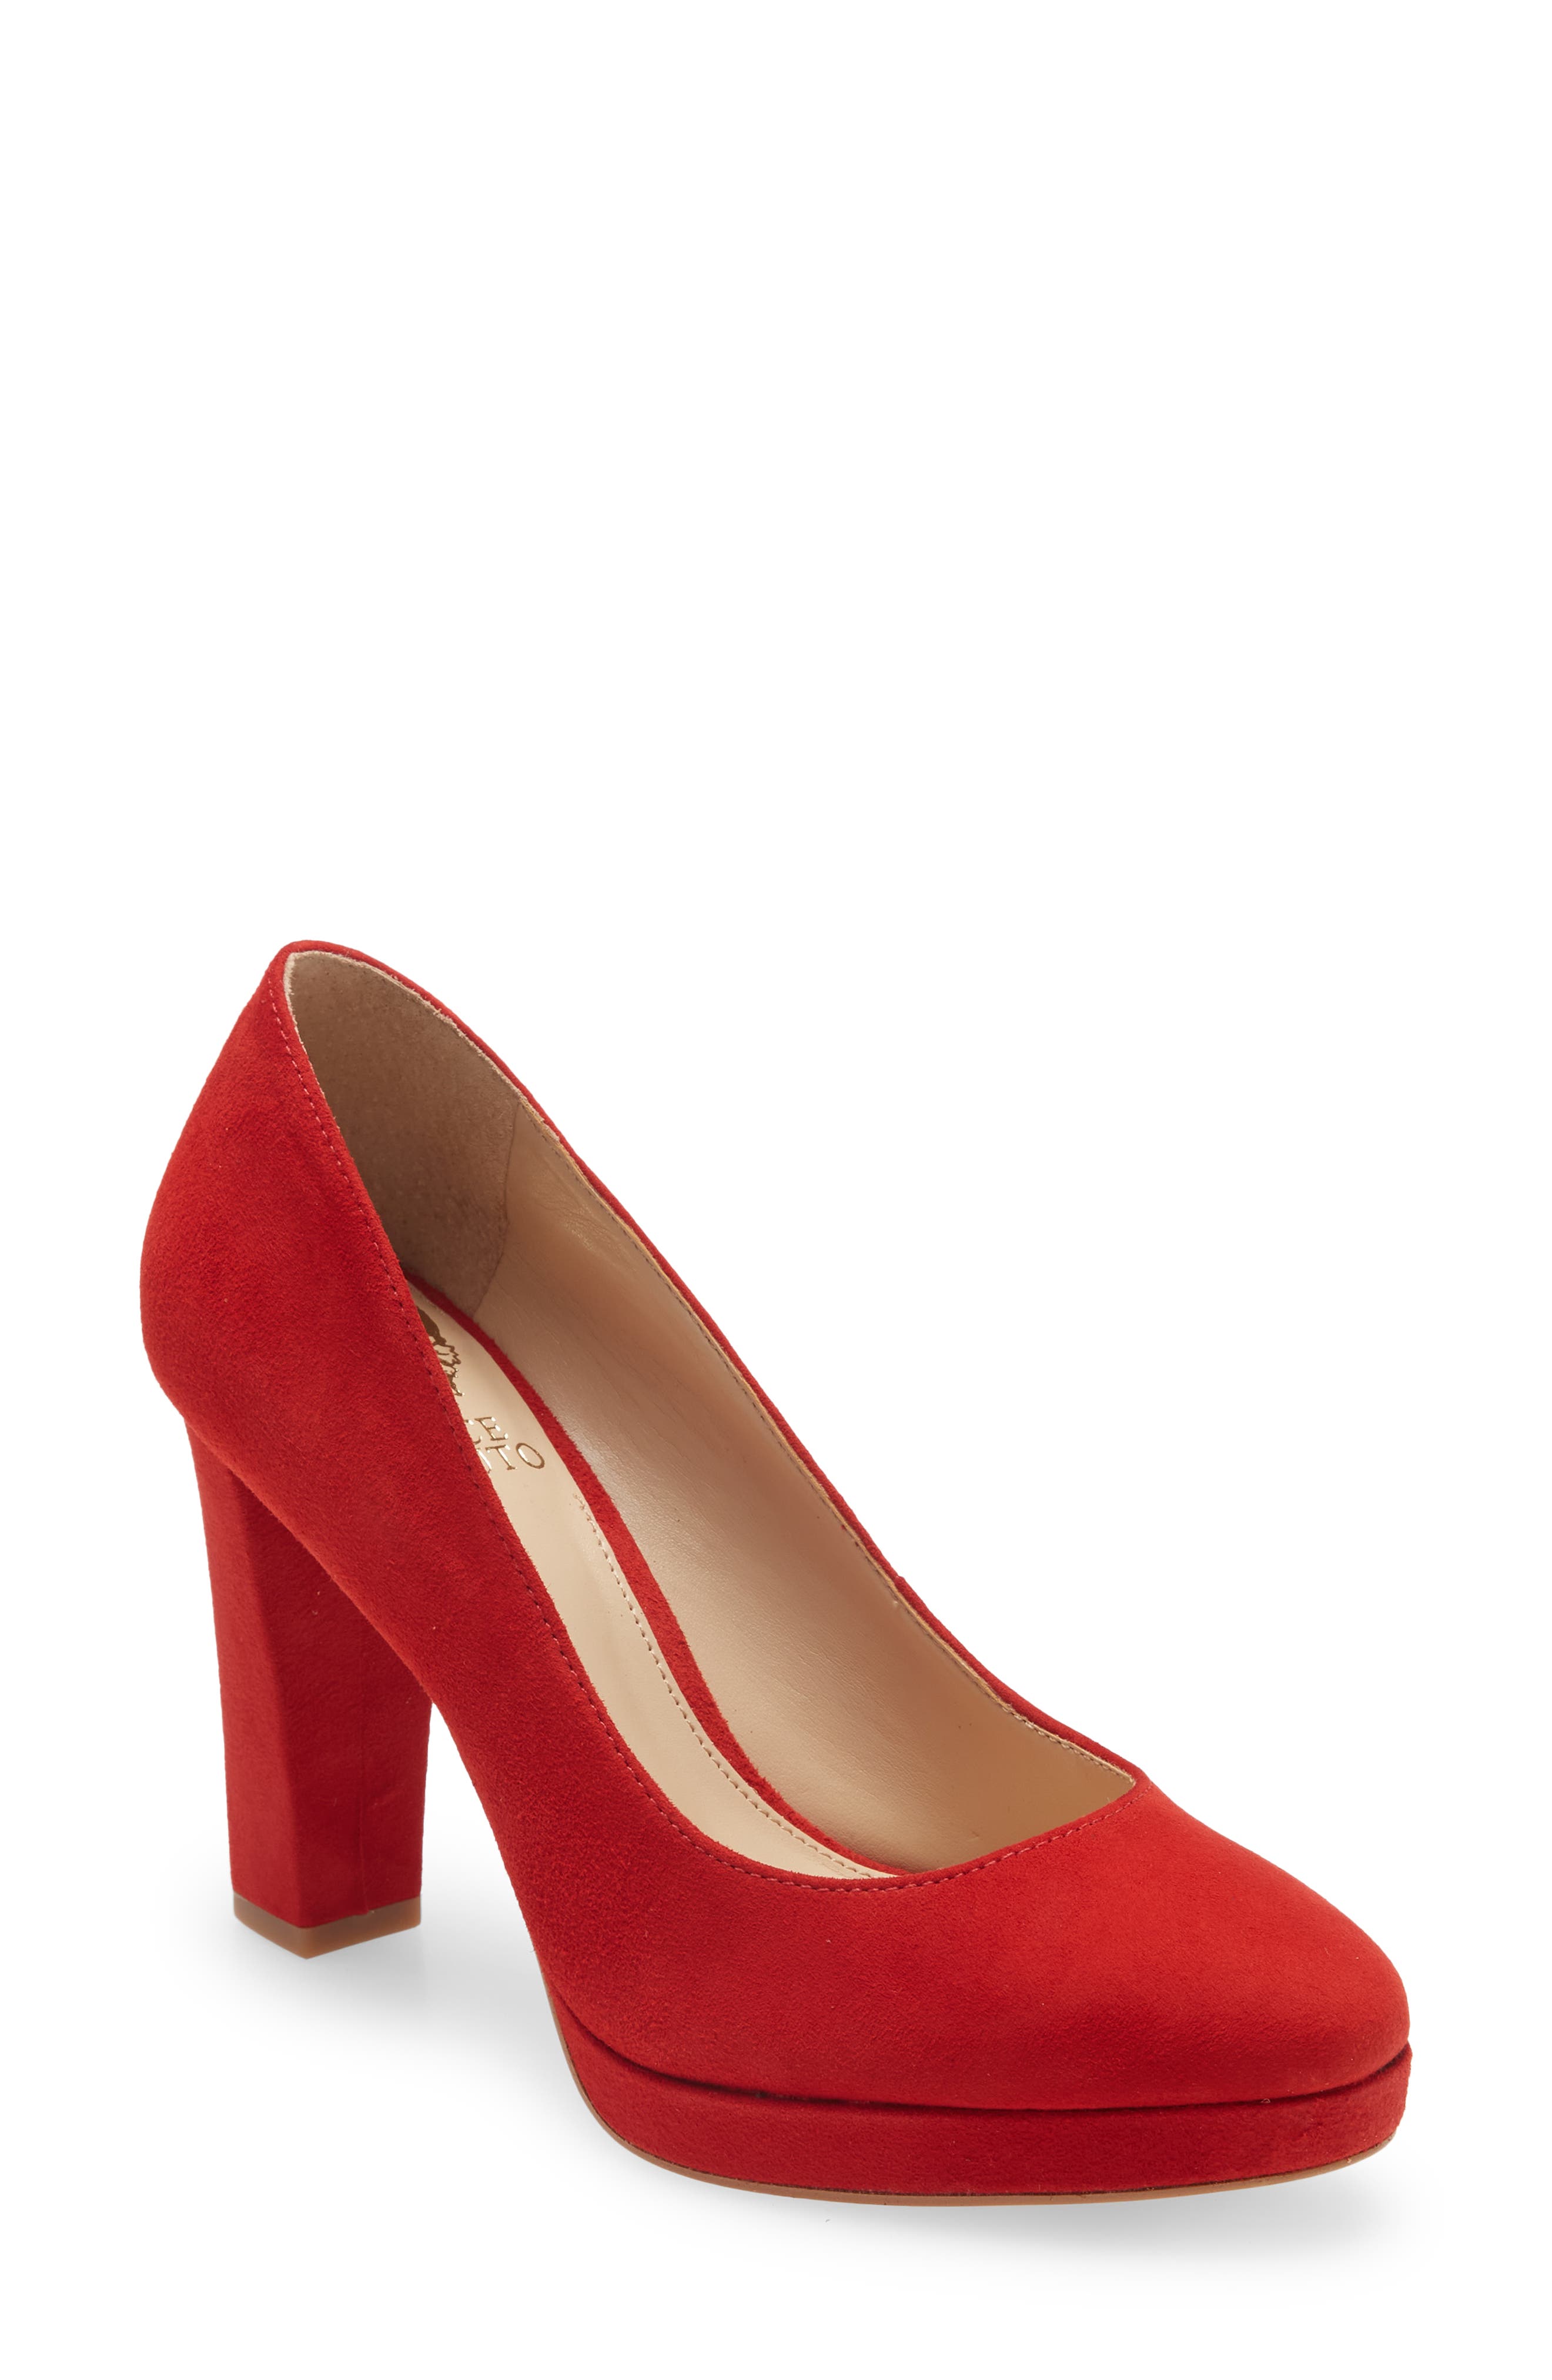 UPC 191707345768 product image for Vince Camuto Halria Pump in Cherry Berry True Suede at Nordstrom, Size 6 | upcitemdb.com